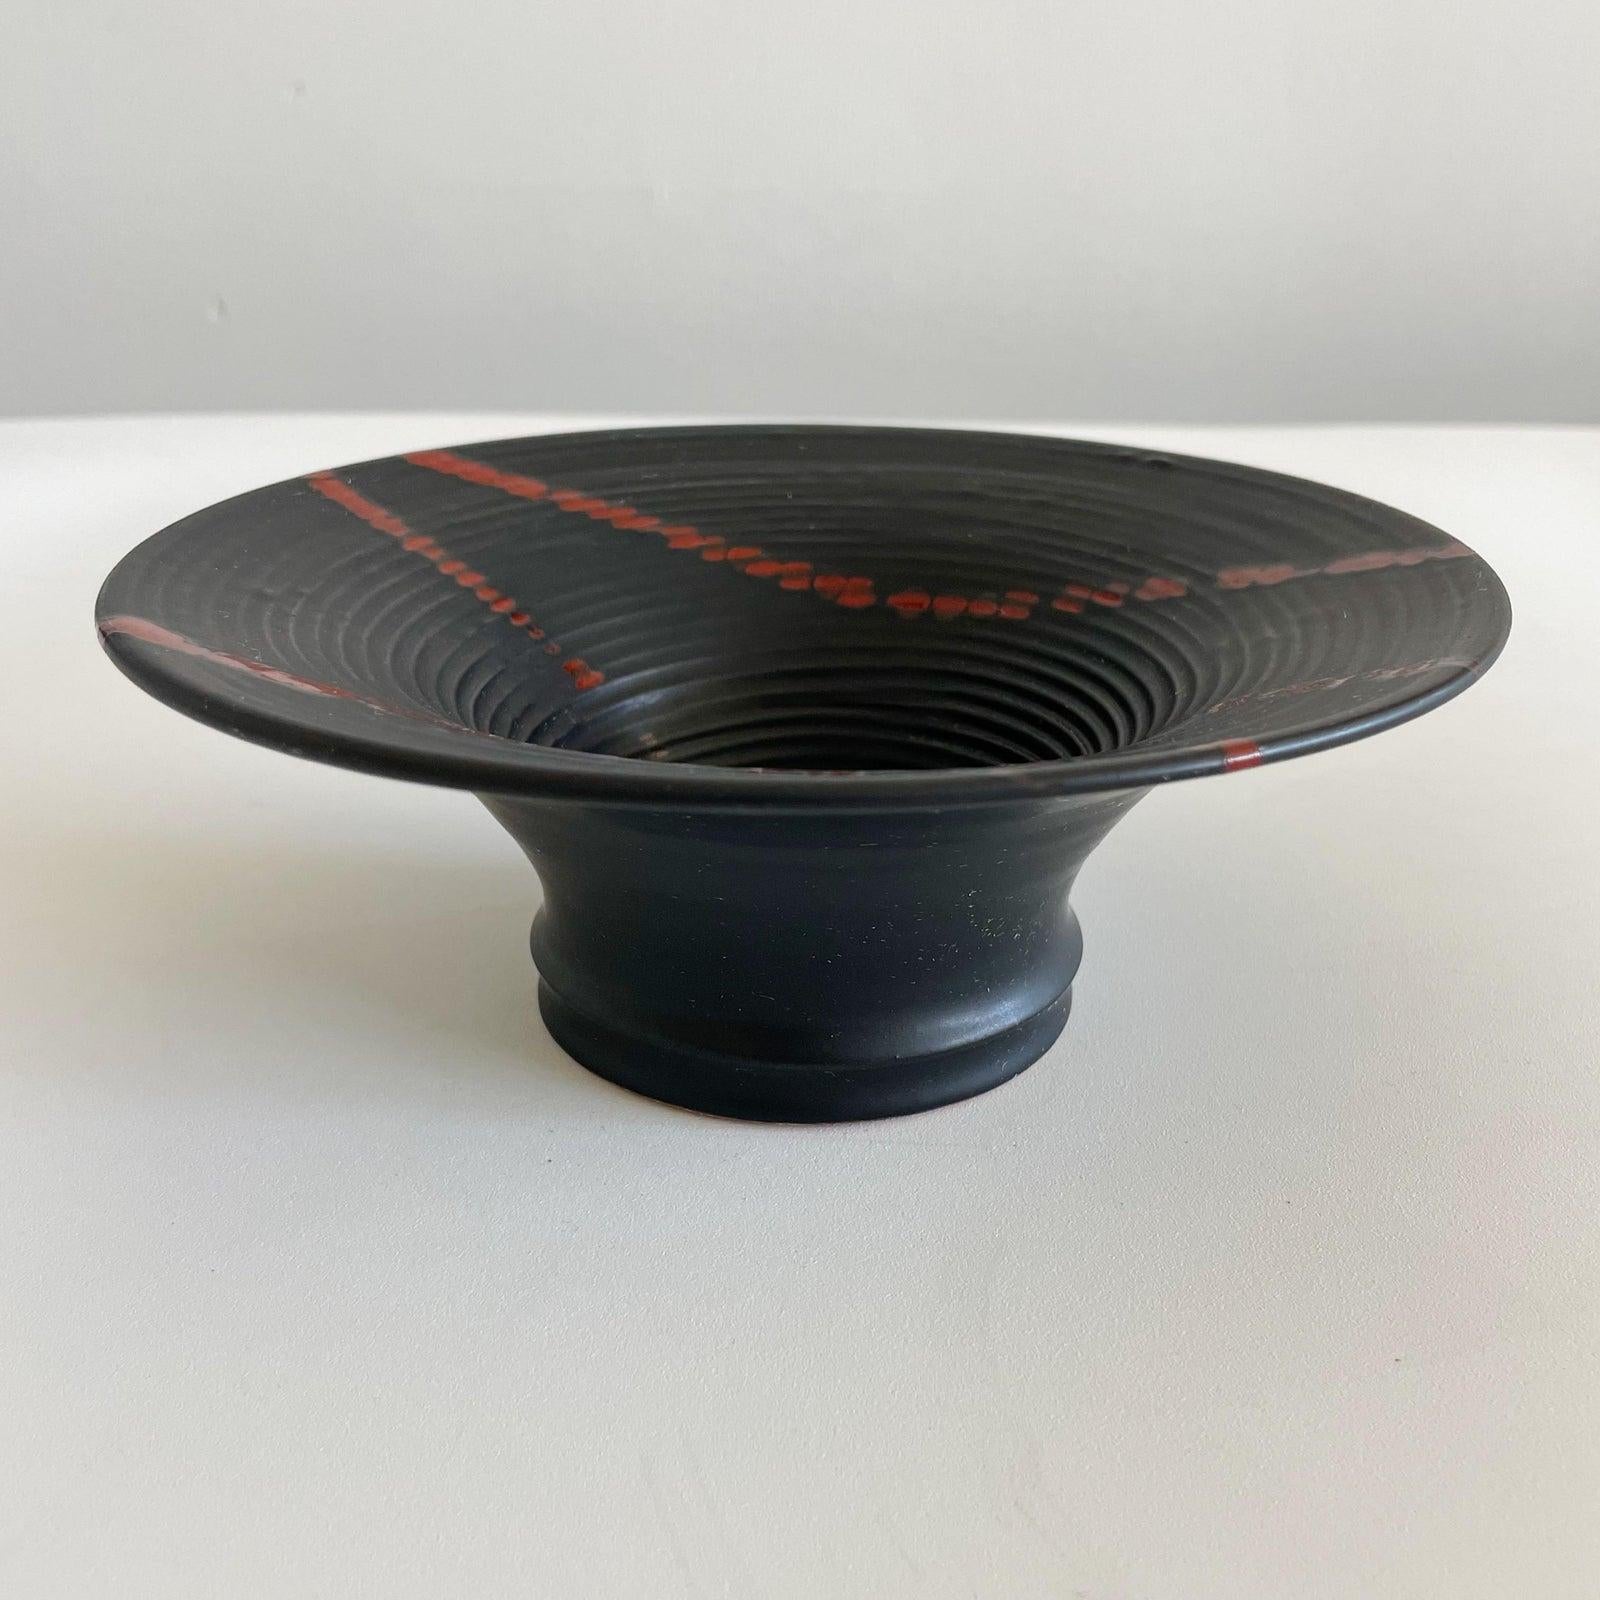 Studio Pottery small large rimmed bowl in black with red decoration. Signed on underside with illegible signature.